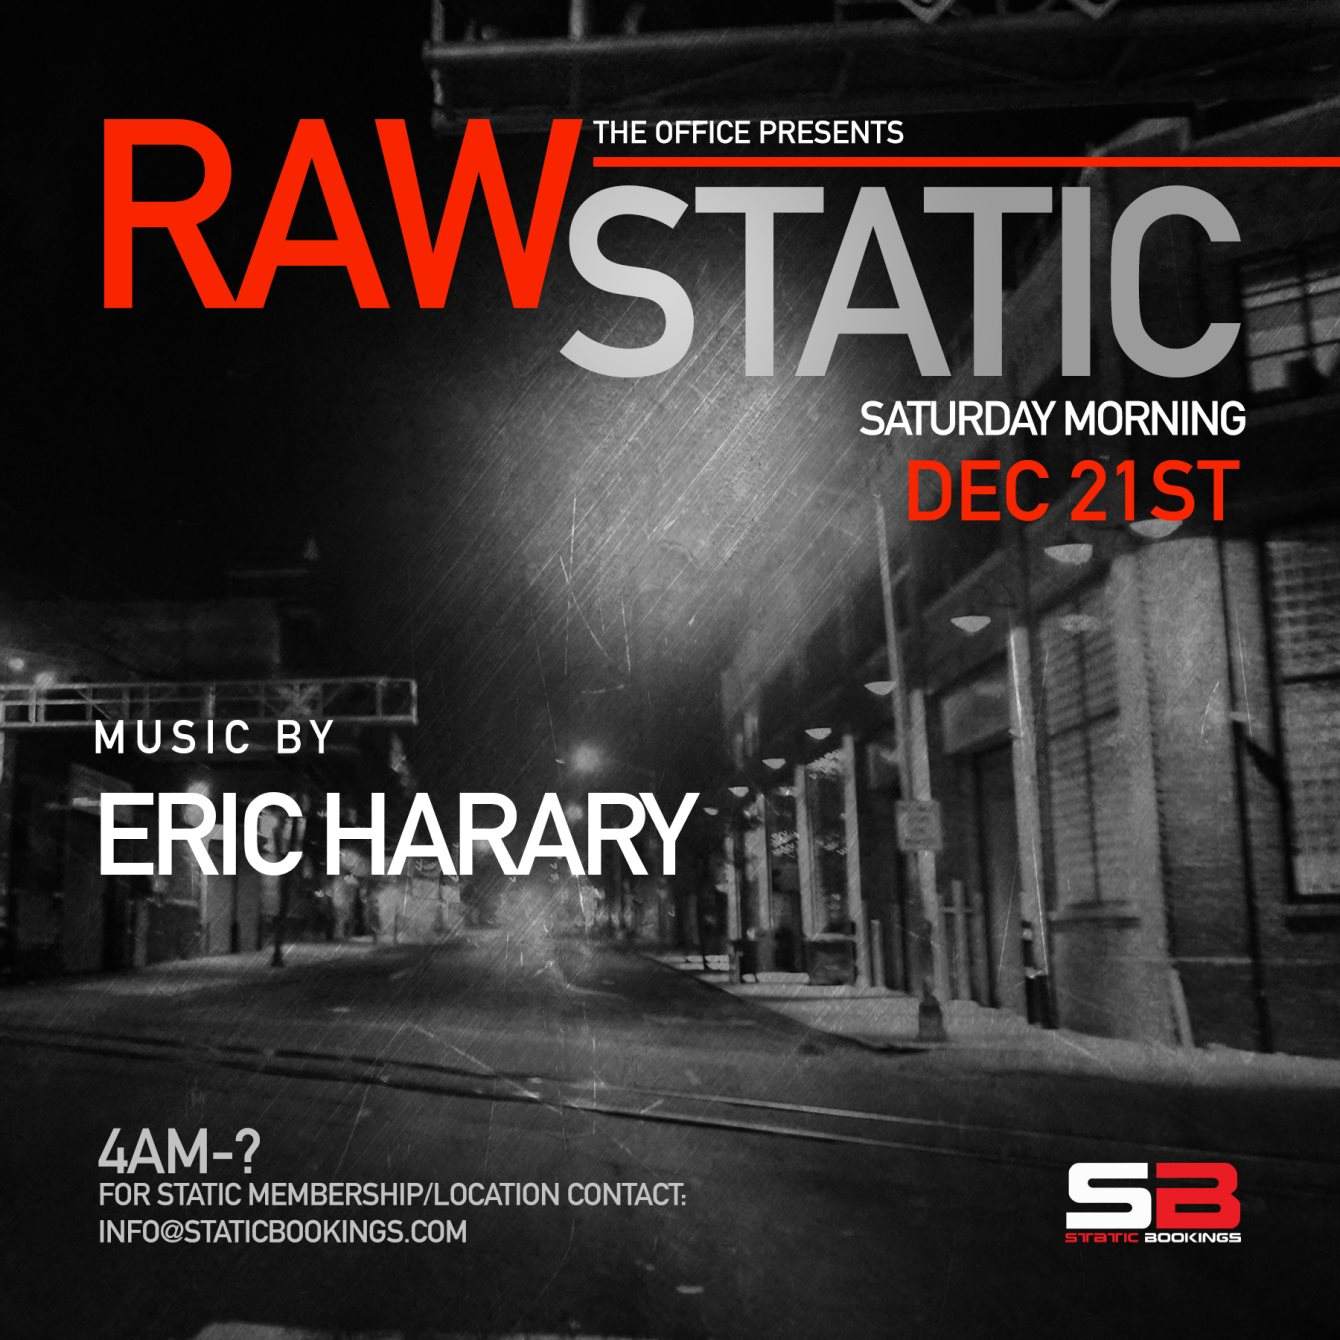 The Office presents: RAW Music By: Eric Harary - Página frontal